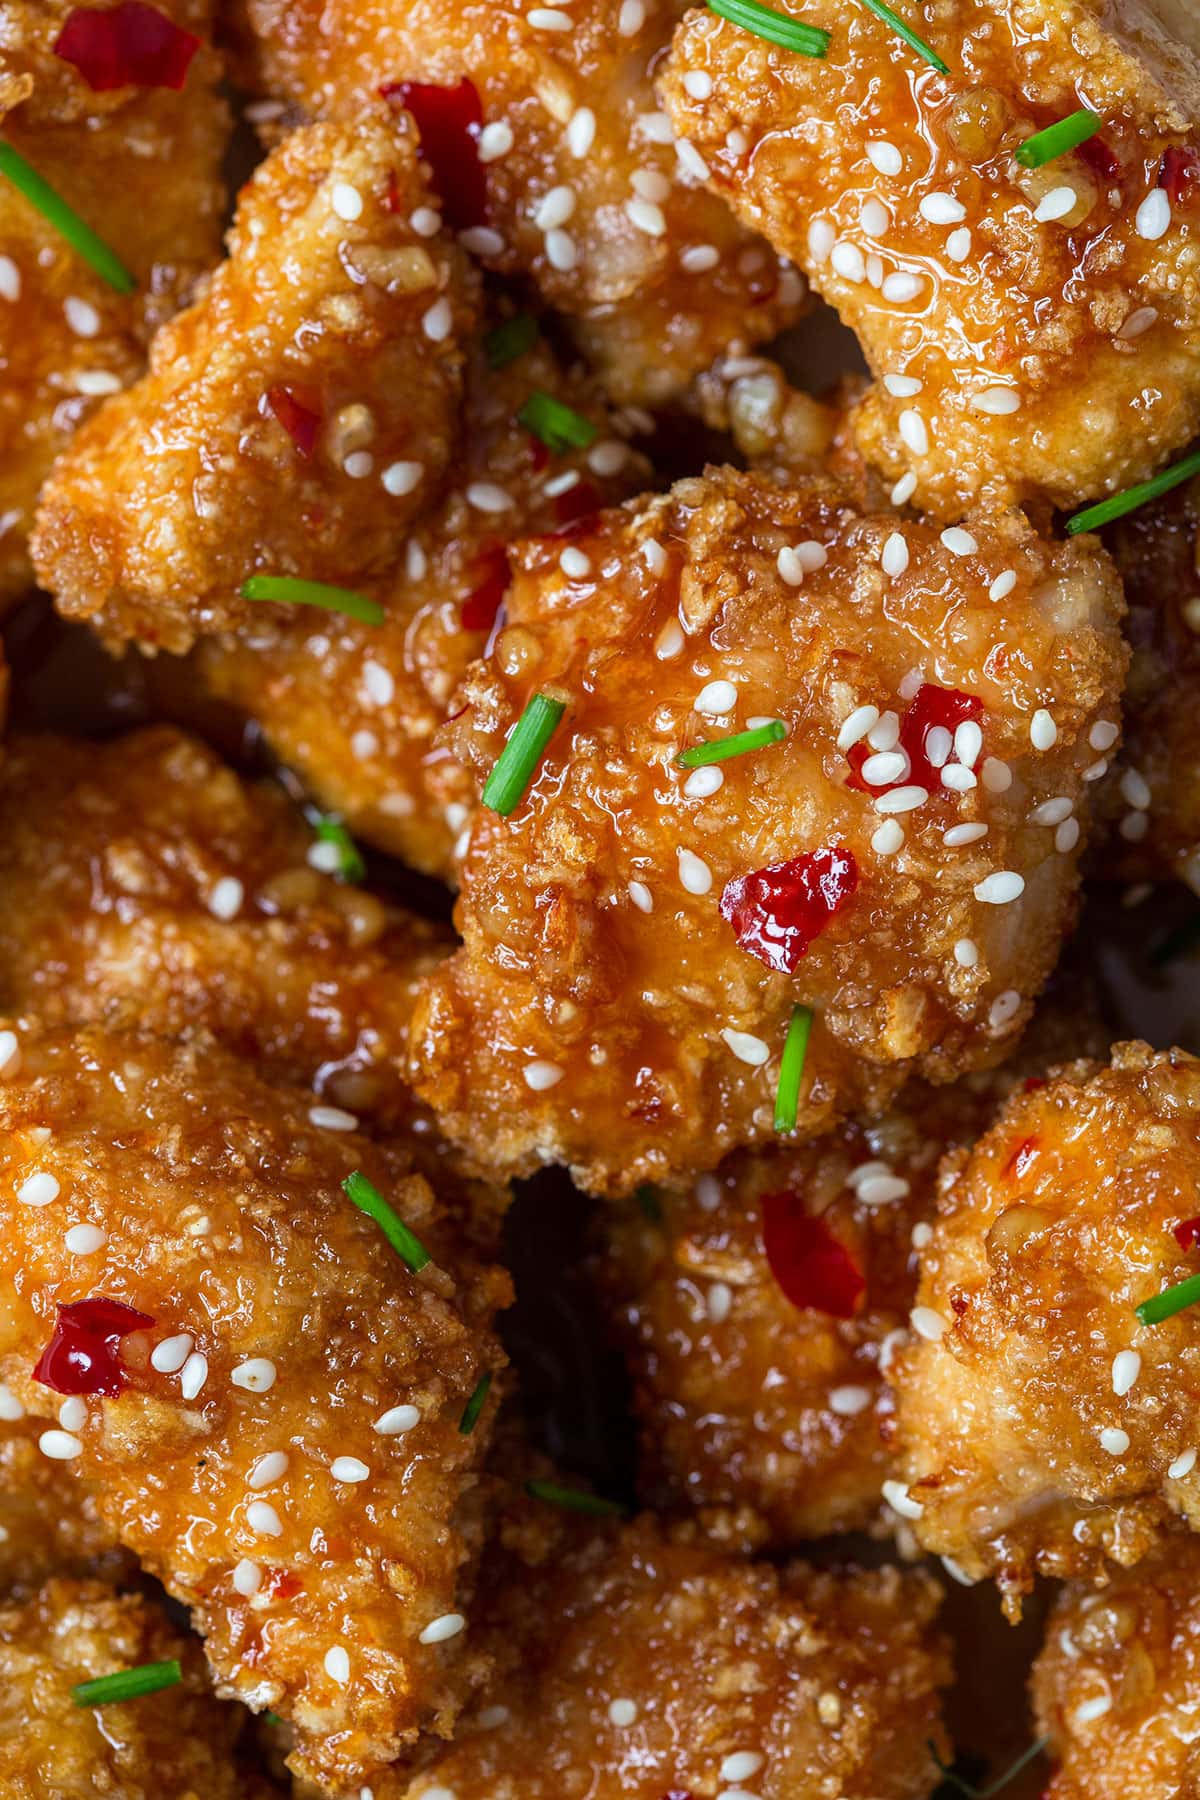 Honey Garlic Chicken Bites – panko-crusted baked chicken nuggets with a sweet and savory honey garlic sauce. So sticky sweet and good | rasamalaysia.com